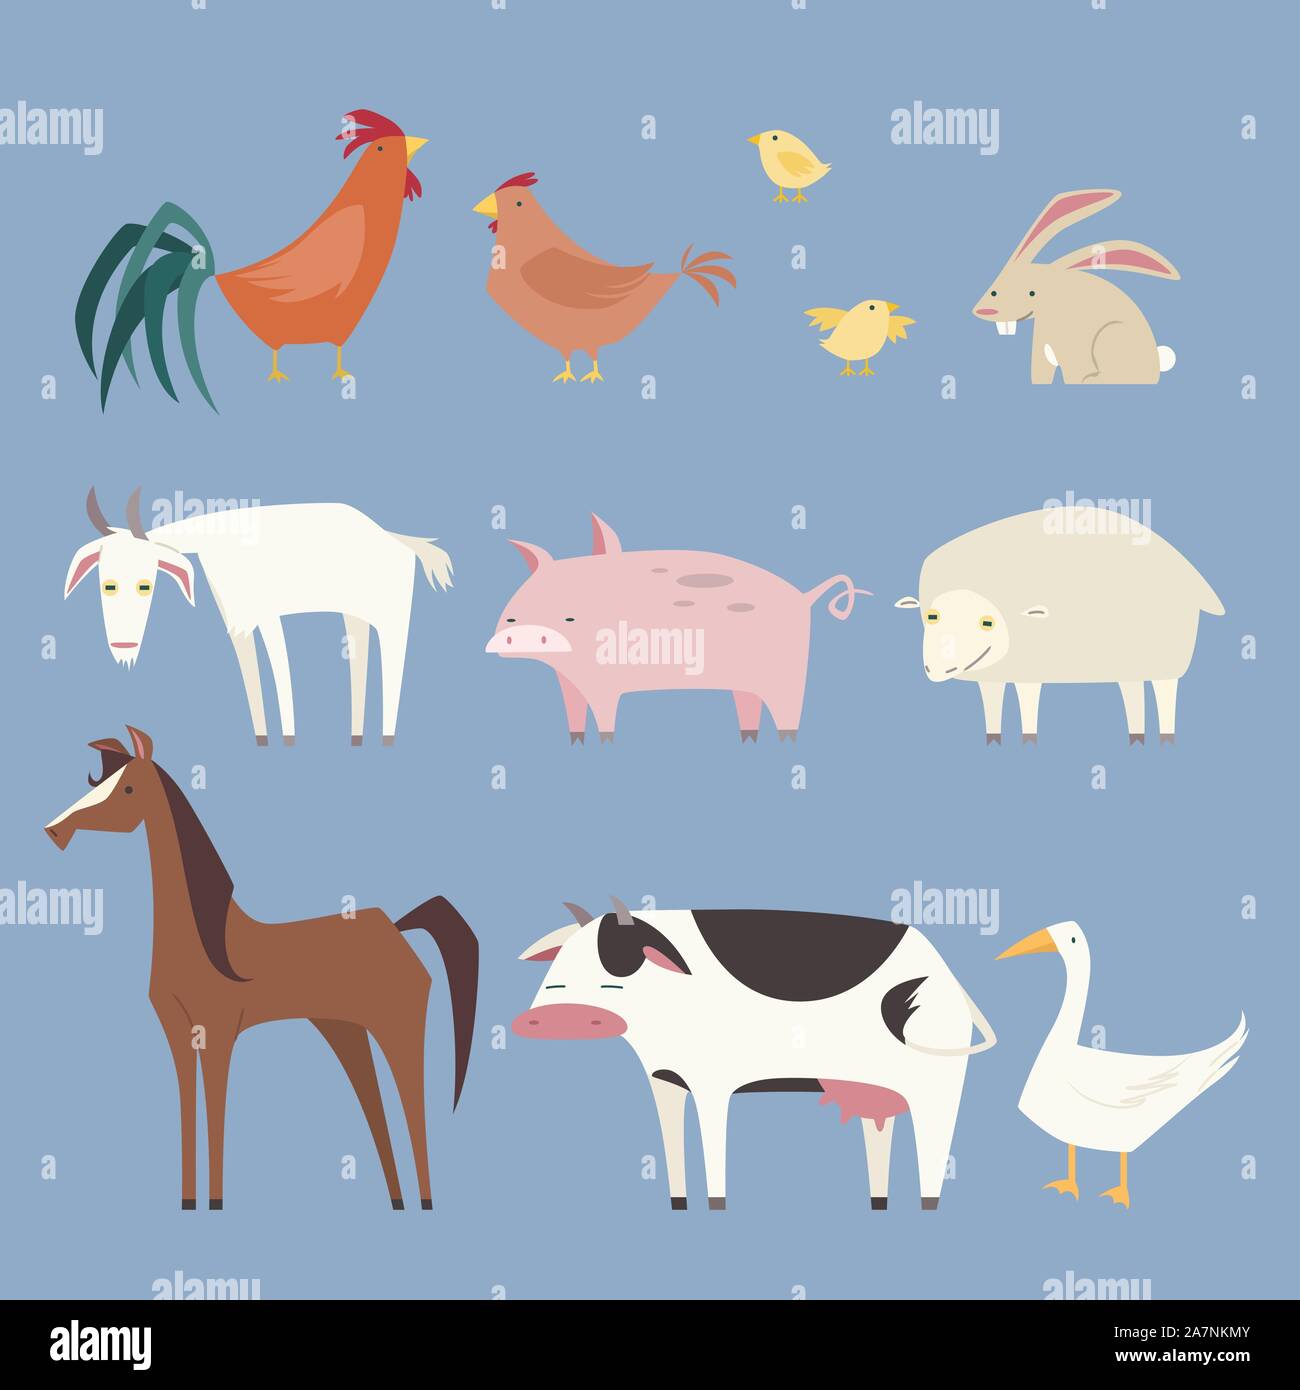 Farm animals collection, with nine different farm animals like: rooster, hen, chicken, rabbit, pig, sheep, horse, cow and duck vector illustration Stock Vector